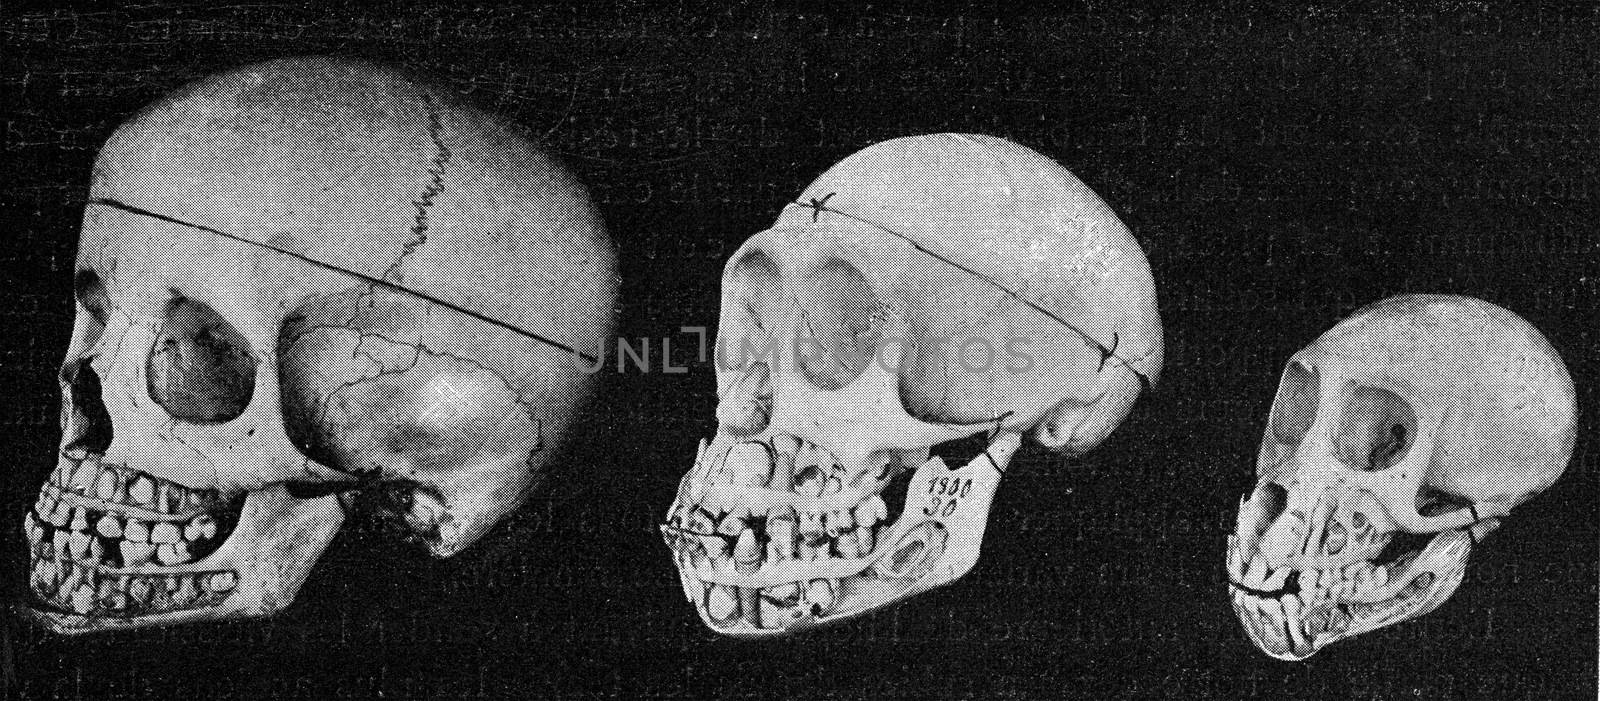 Skull of the man, the chimpanze and the Inuus, with the jaws cut by Morphart